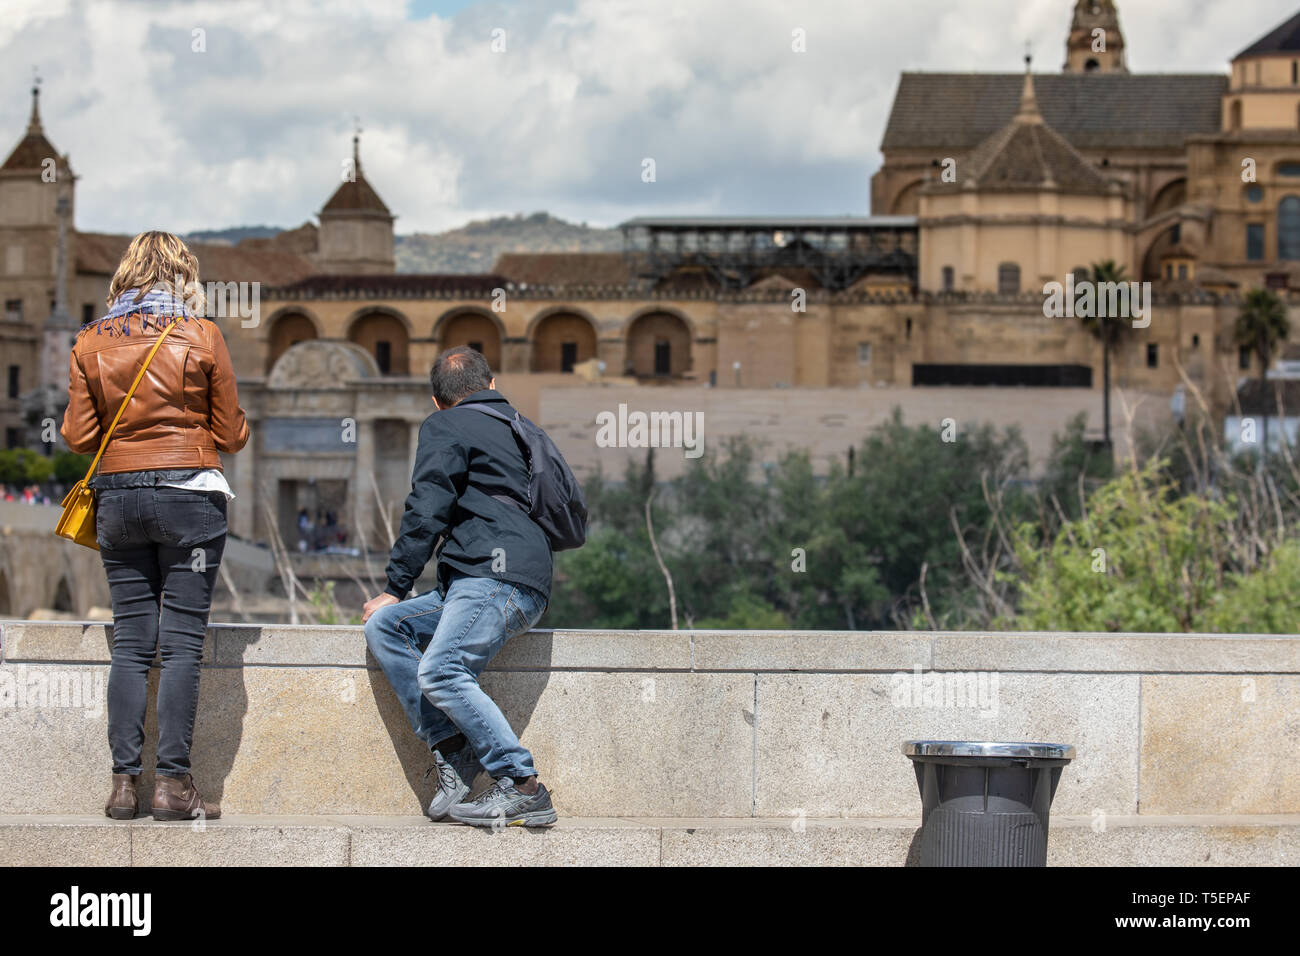 Cordoba, Spain - April 23, 2019: Tourist couple in Cordoba looking at the Mosque in front of them Stock Photo